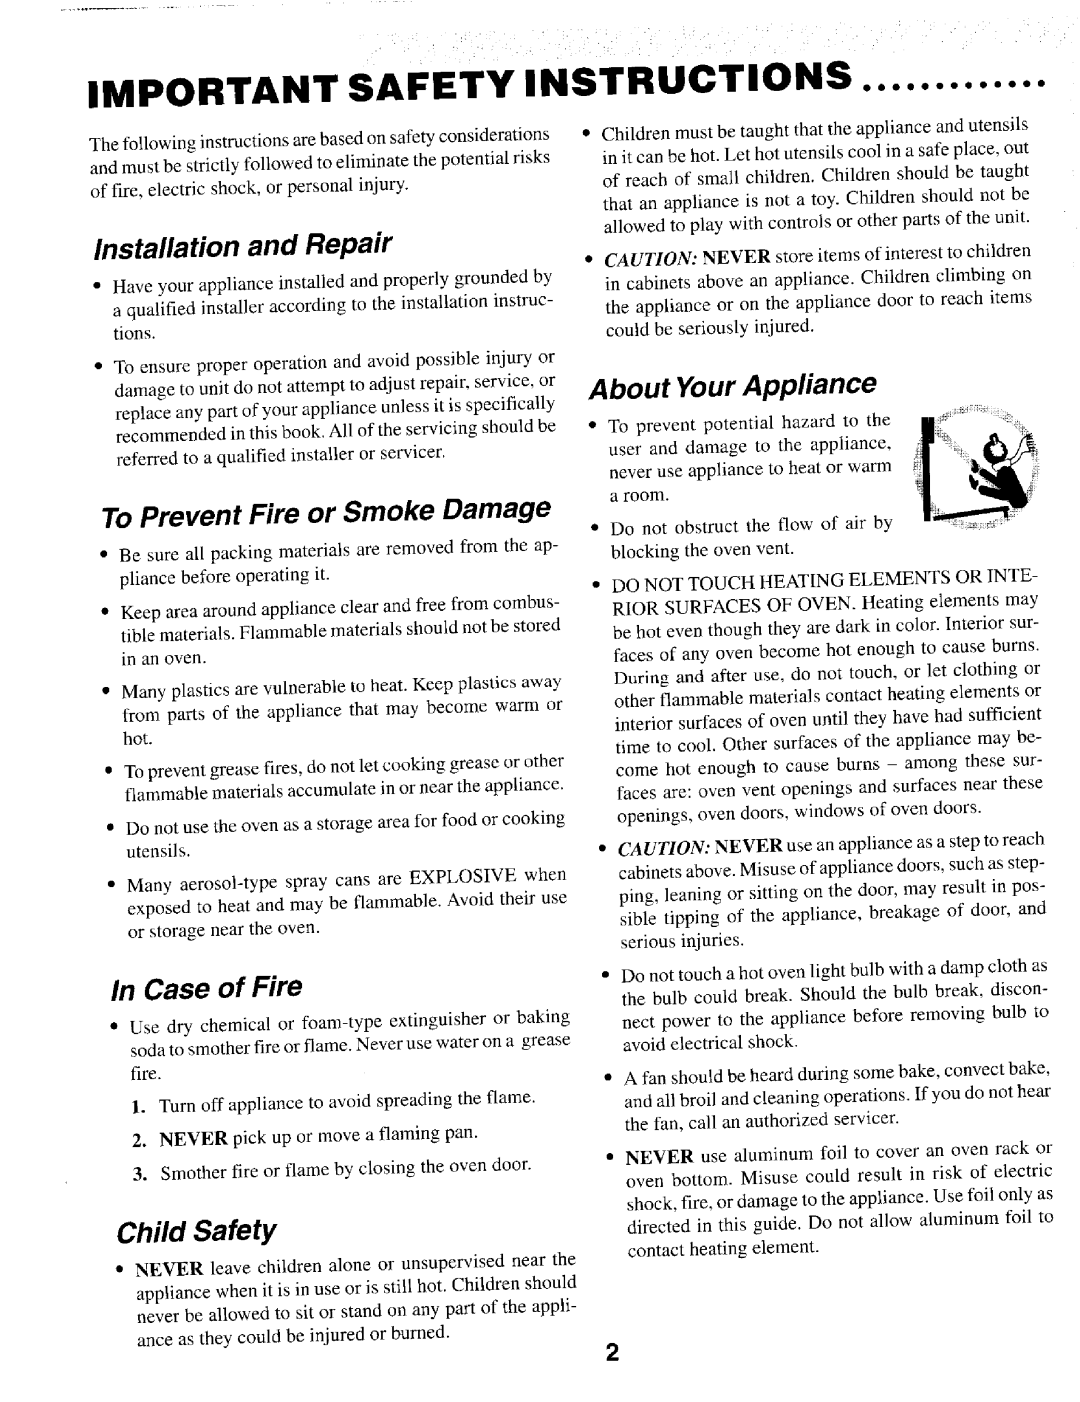 Maytag MEWED7 Important Safety Instructions, Installation and Repair, In Case of Fire, To Prevent Fire or Smoke Damage 